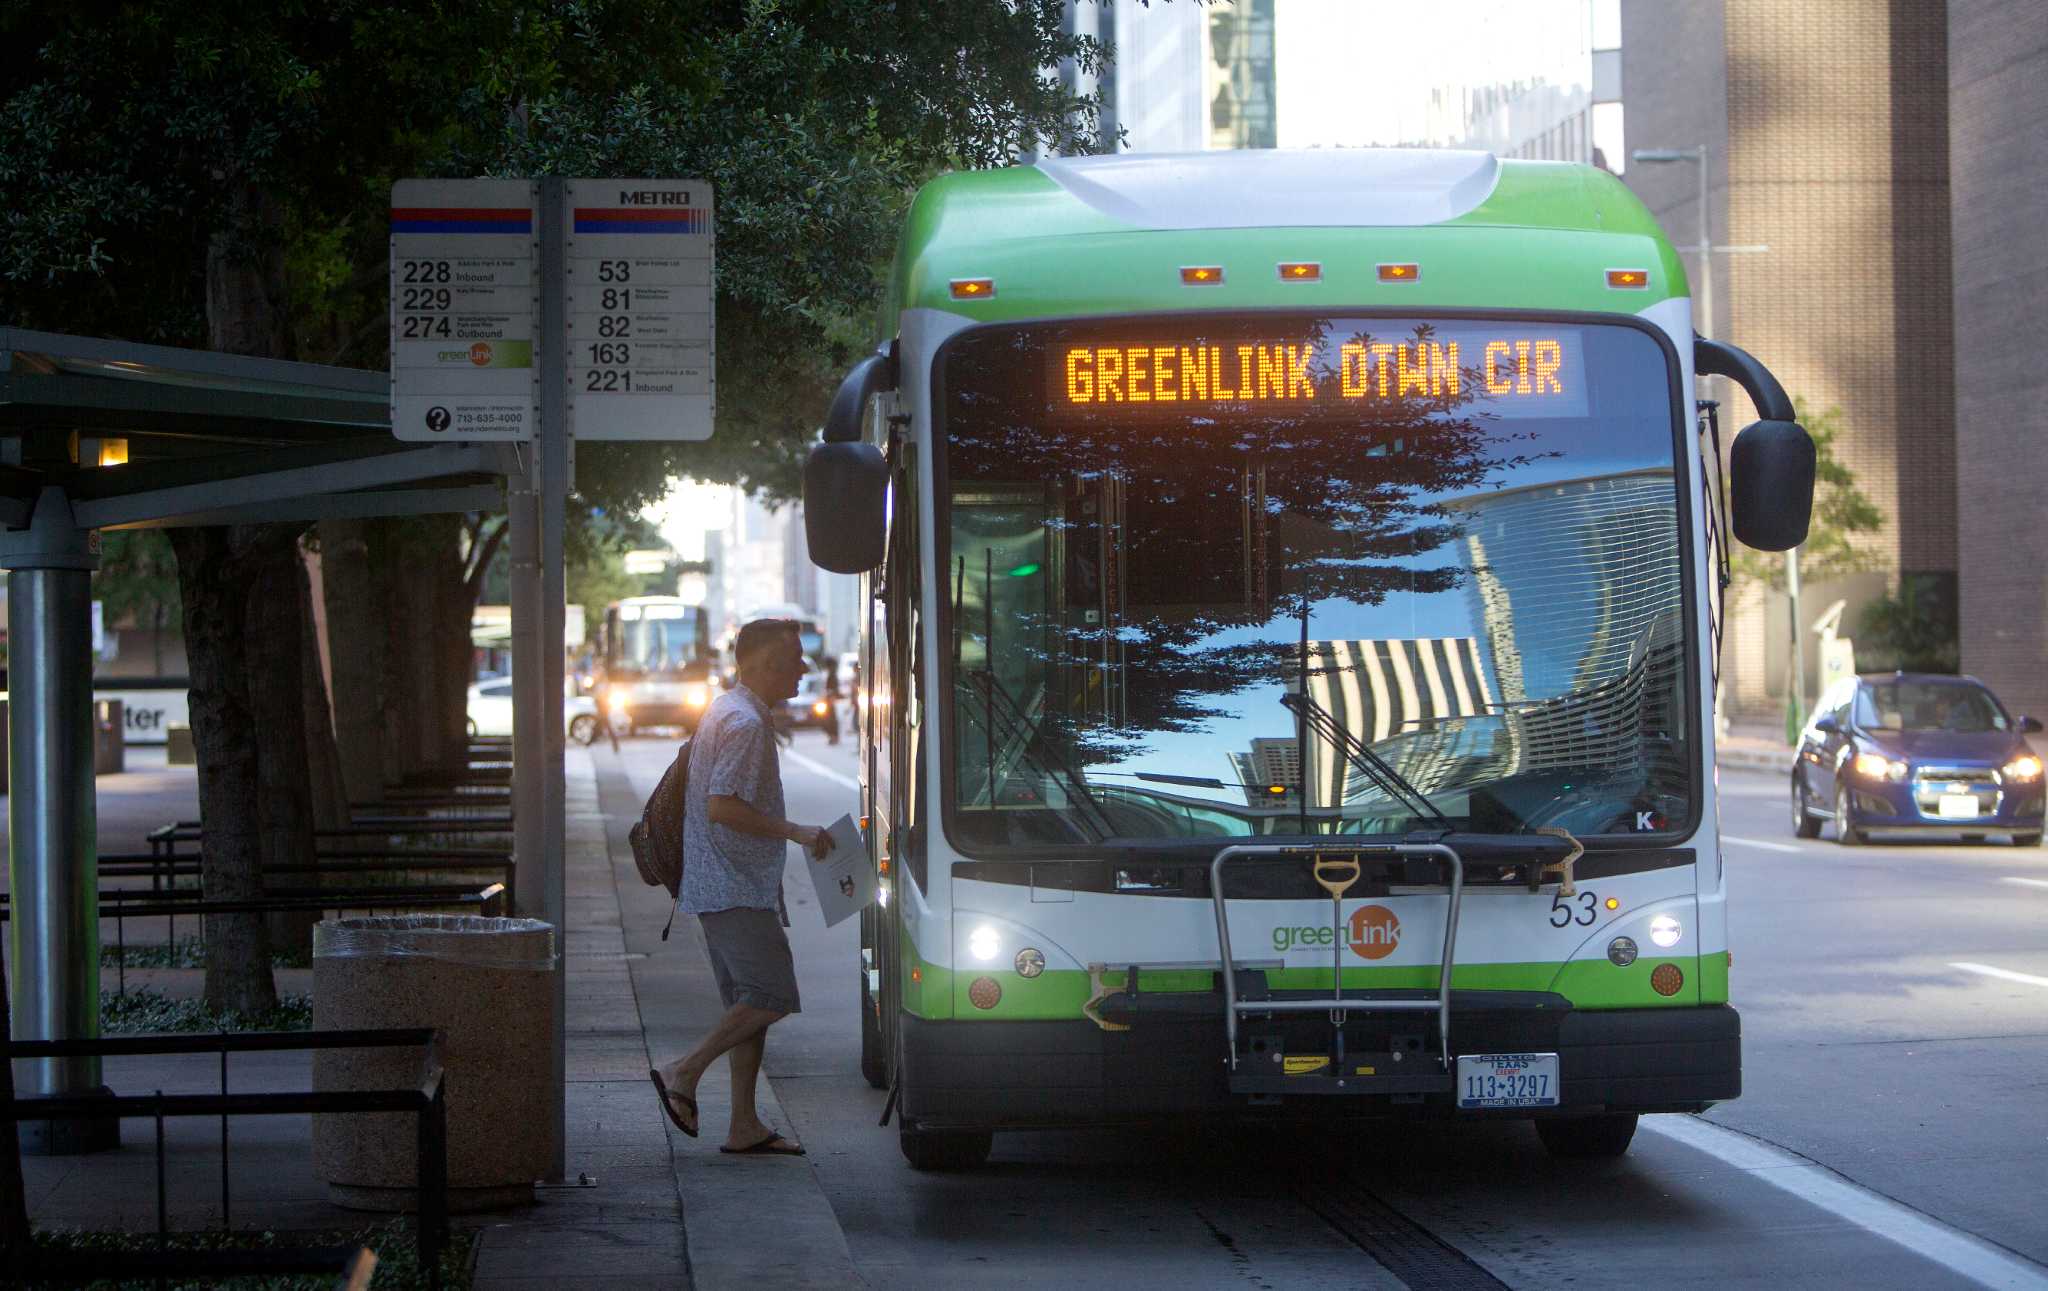 GreenLink gets new routes as growth continues downtown - Houston Chronicle2048 x 1291